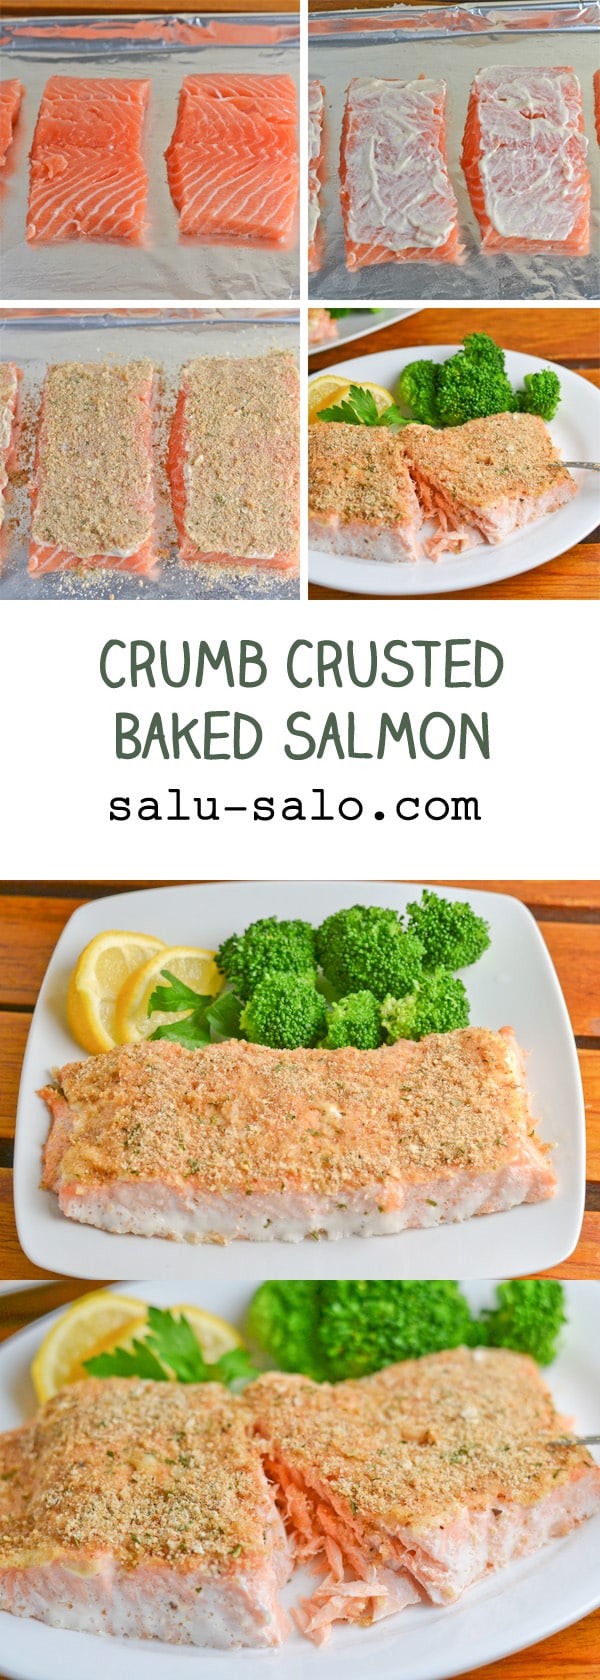 Crumb Crusted Baked Salmon